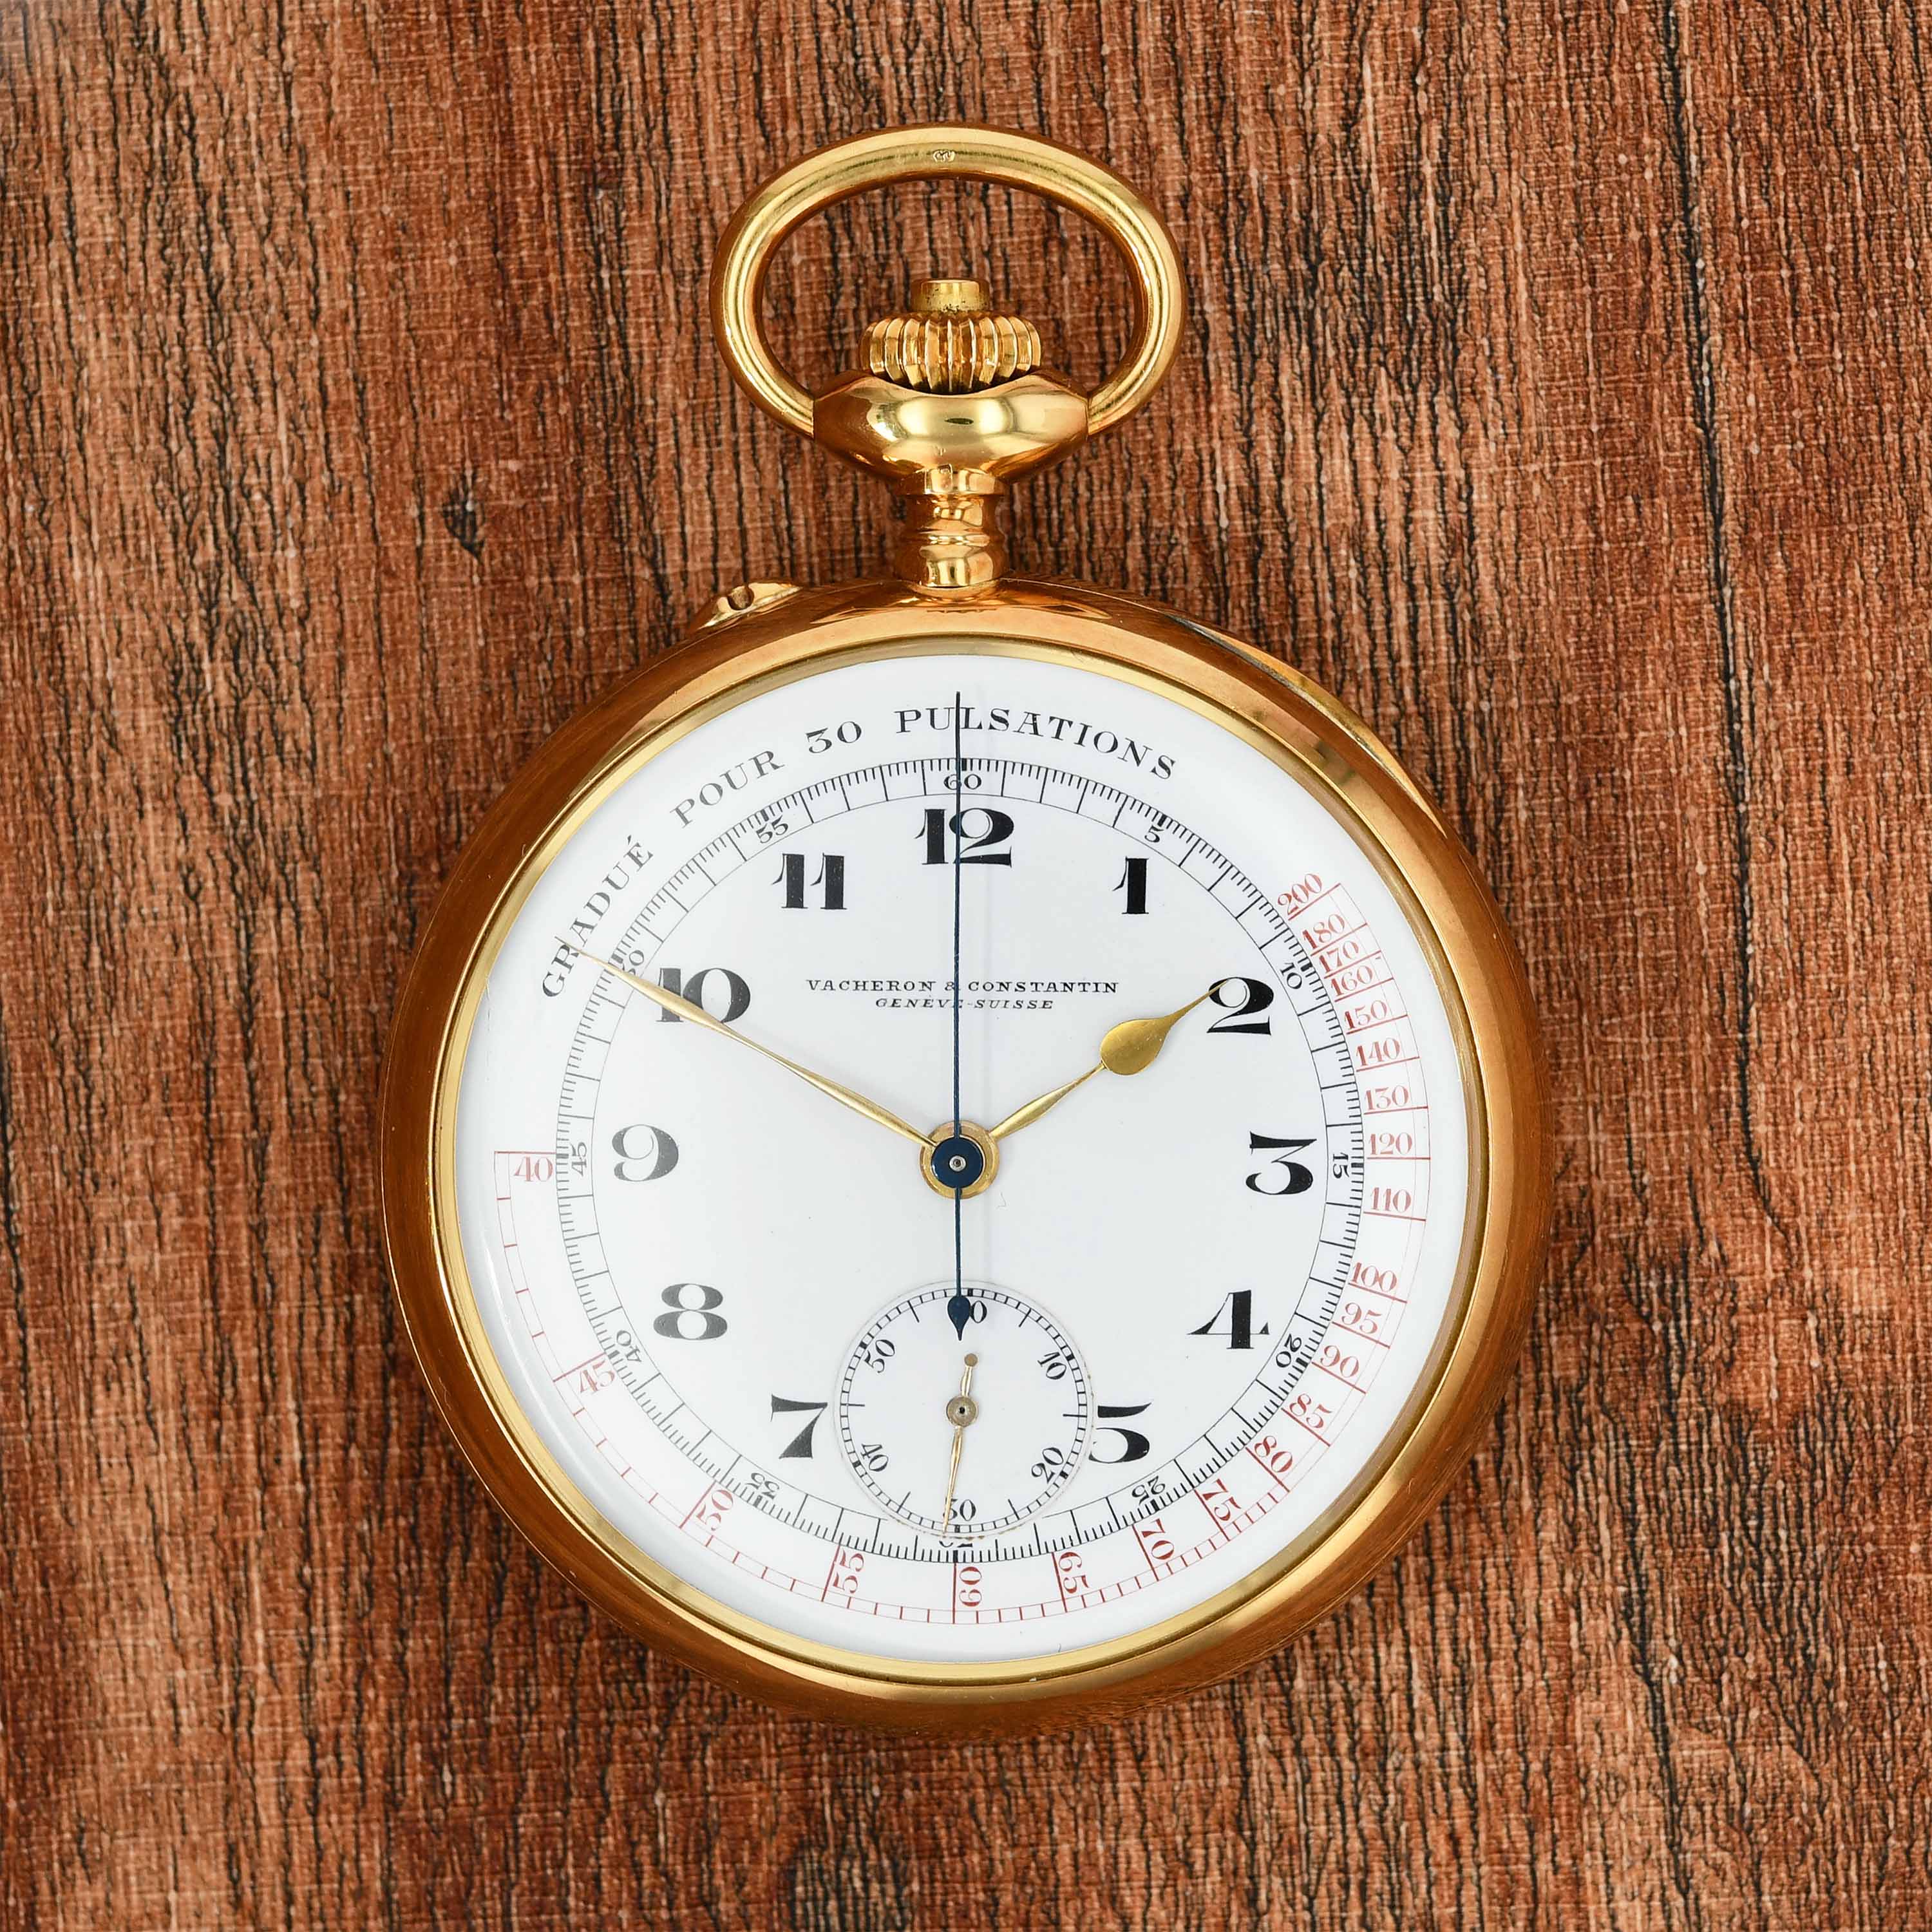 Vacheron Constantin Doctor’s pocket watch, chronograph, pulsometer scale, enamel dial in yellow gold img main2